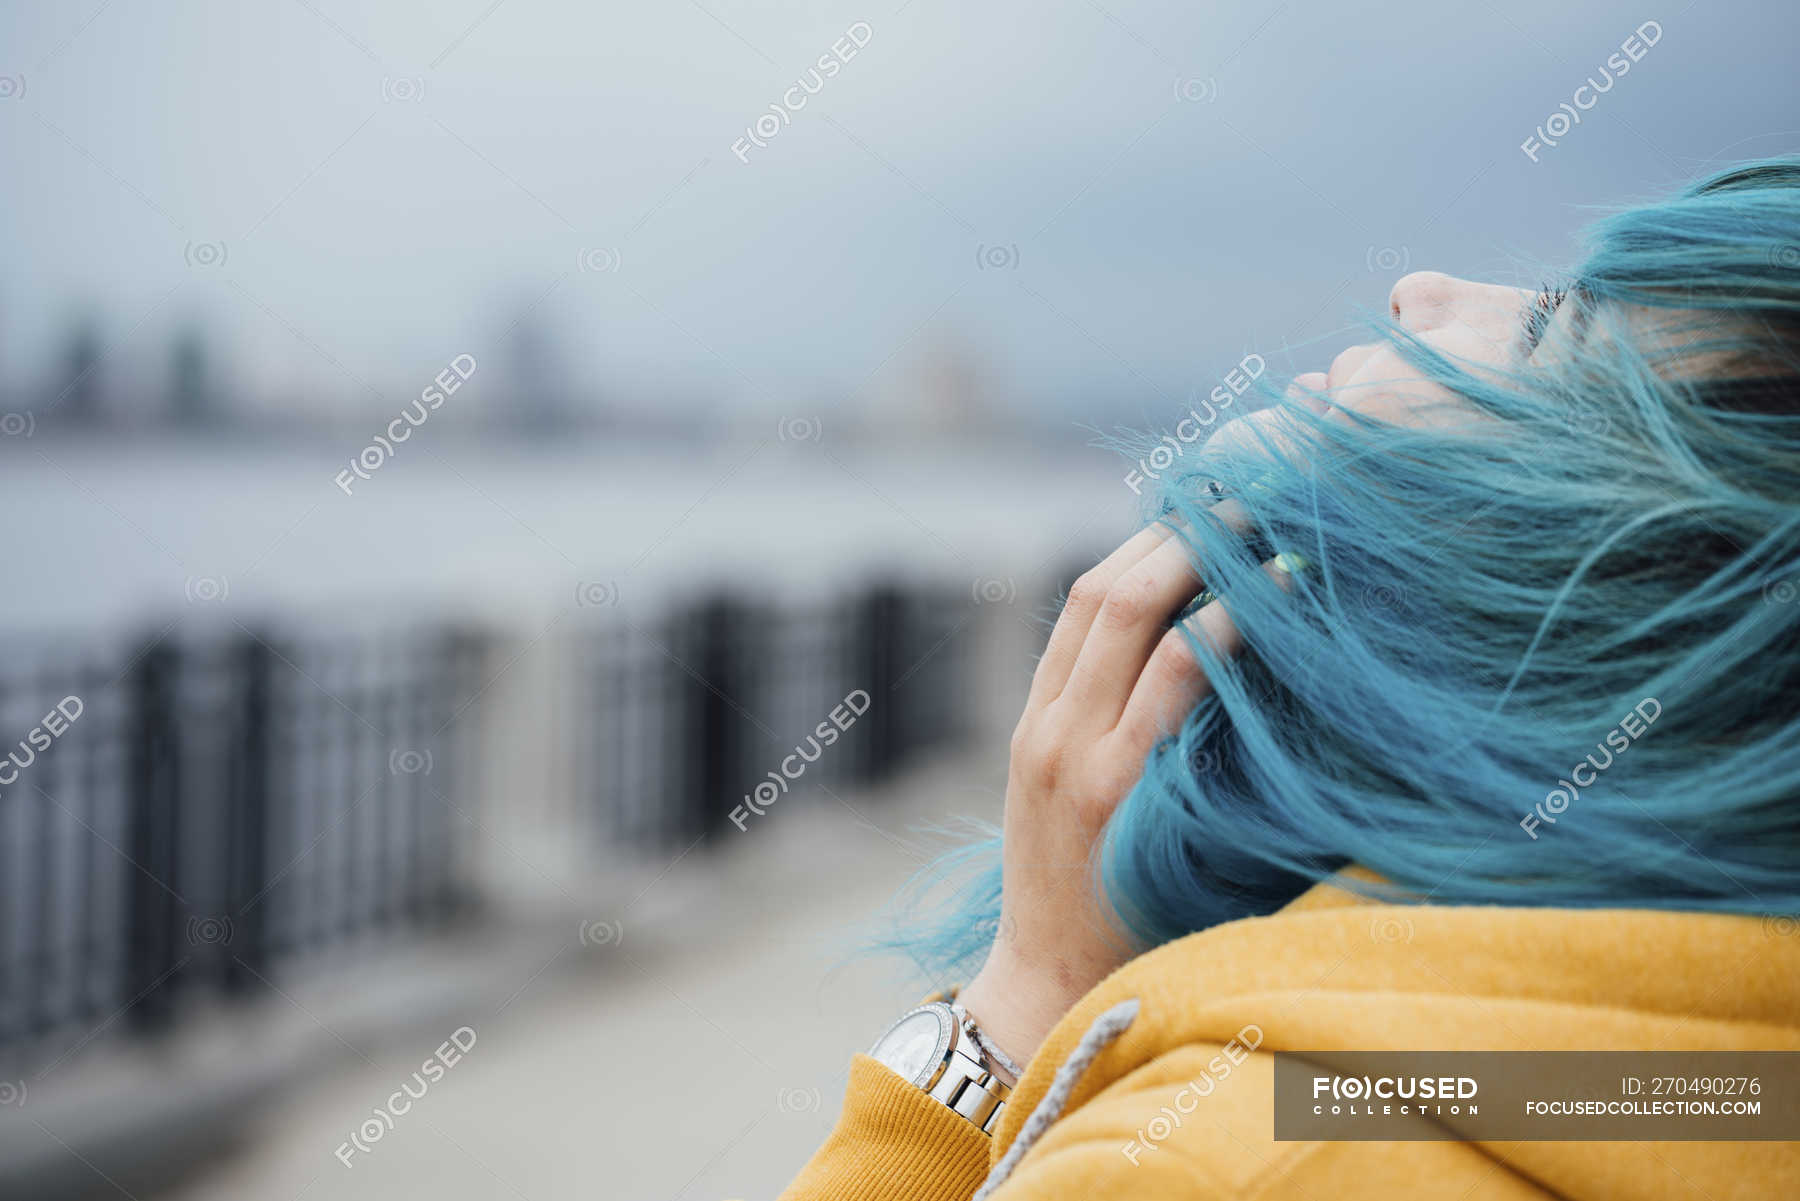 3. Middle-aged woman with dyed blue hair - wide 4